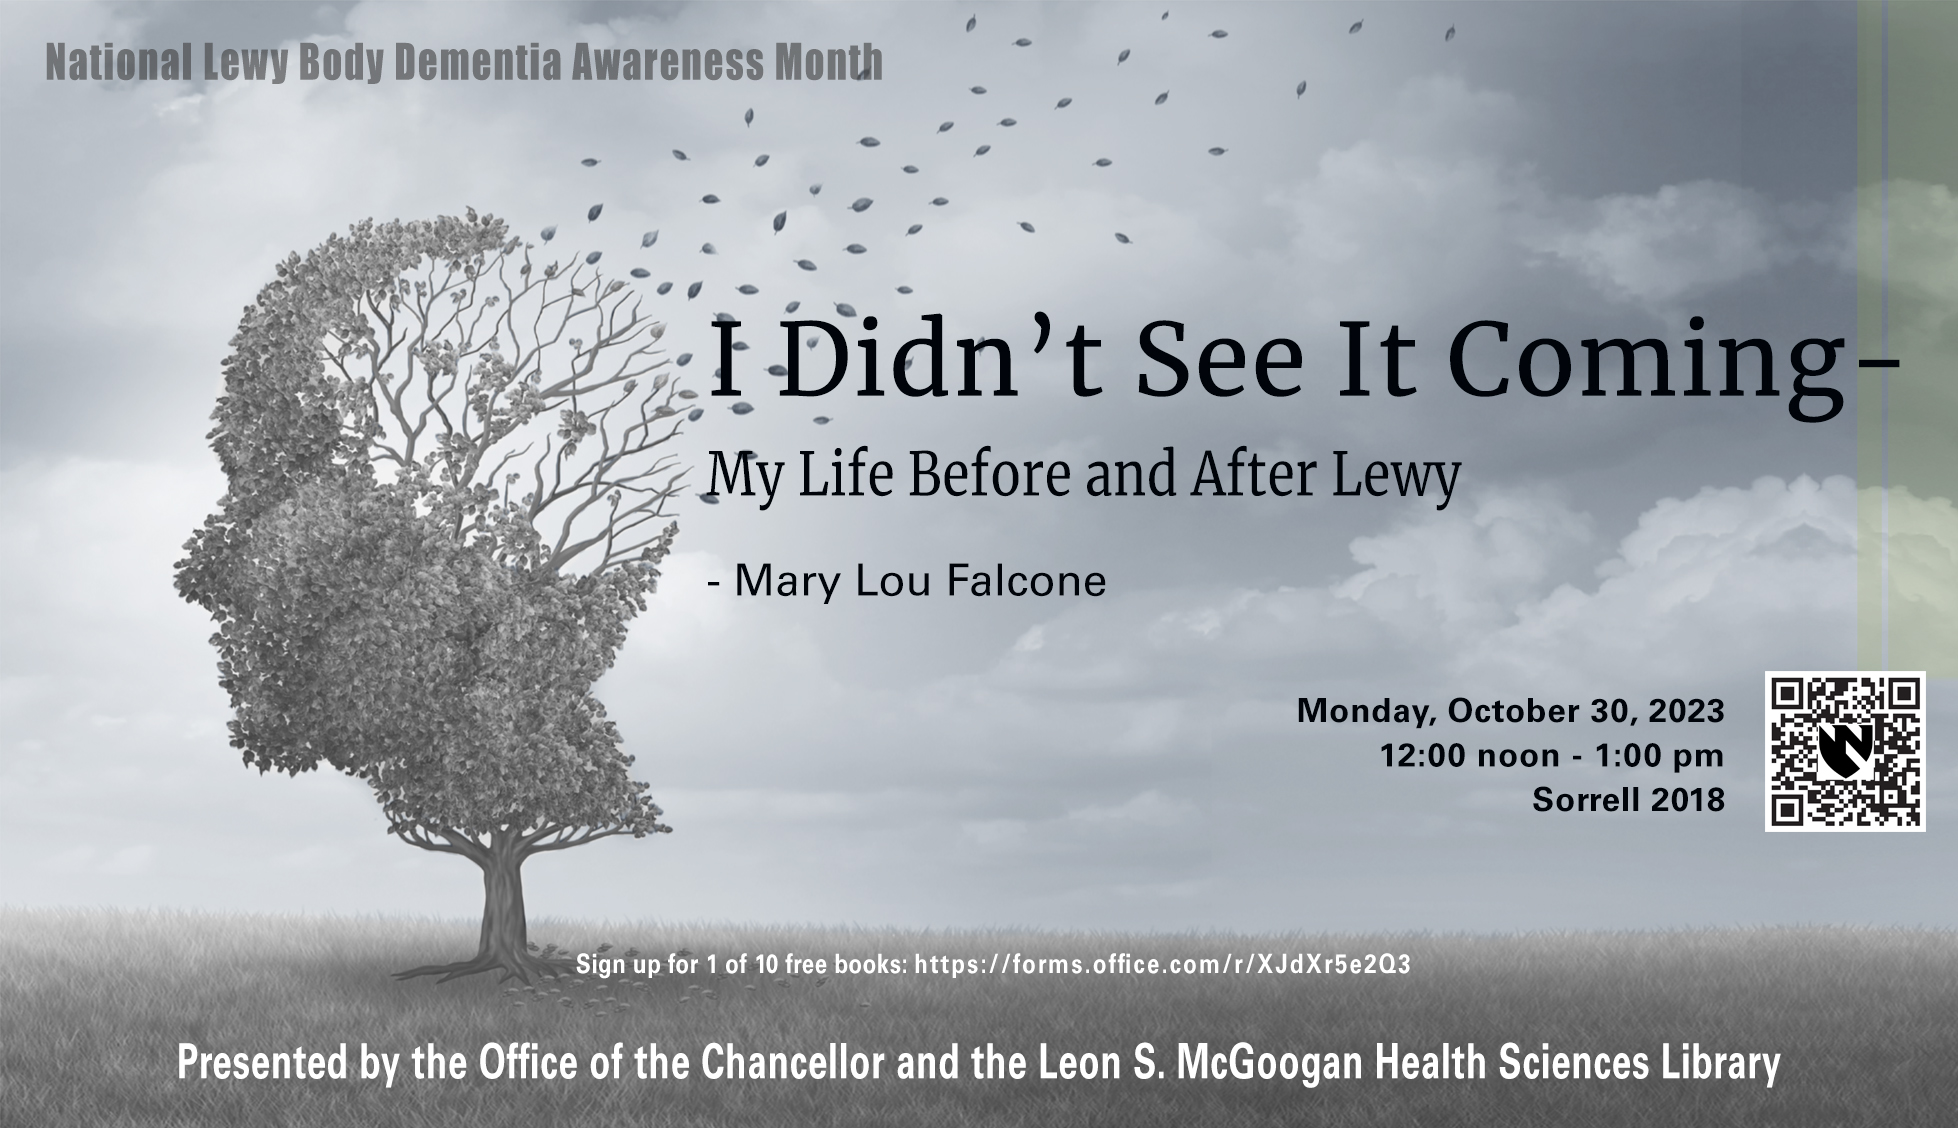 Mary Lou Falcone presentation info overlay on a gray graphic